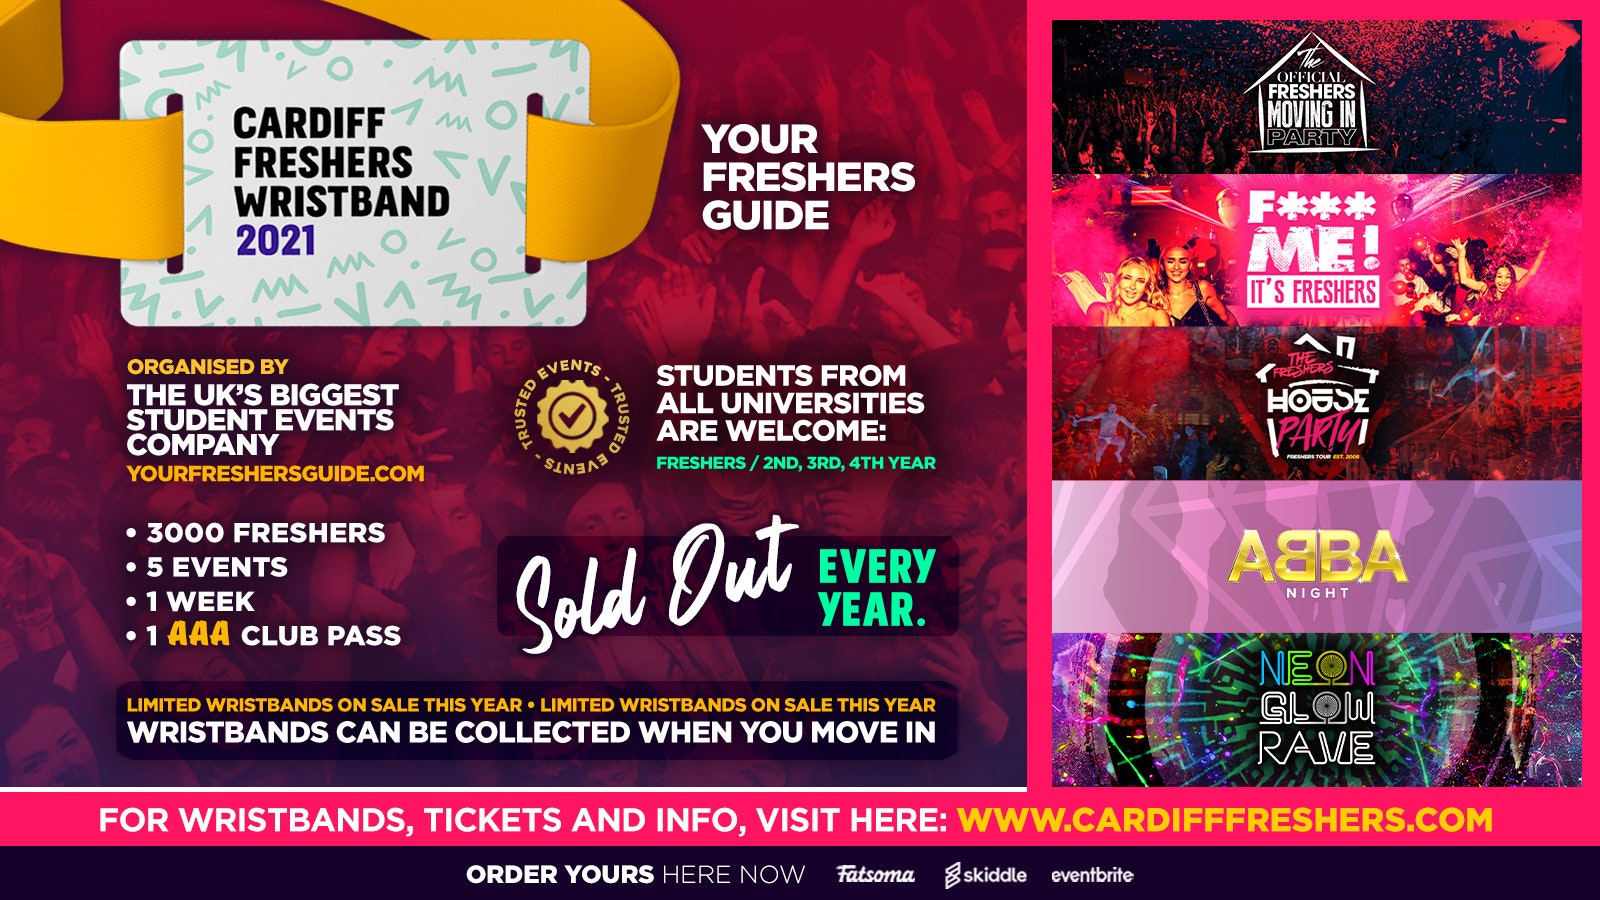 Cardiff Freshers Wristband 2021 – The Official Freshers Pass | Includes the biggest events in Cardiff